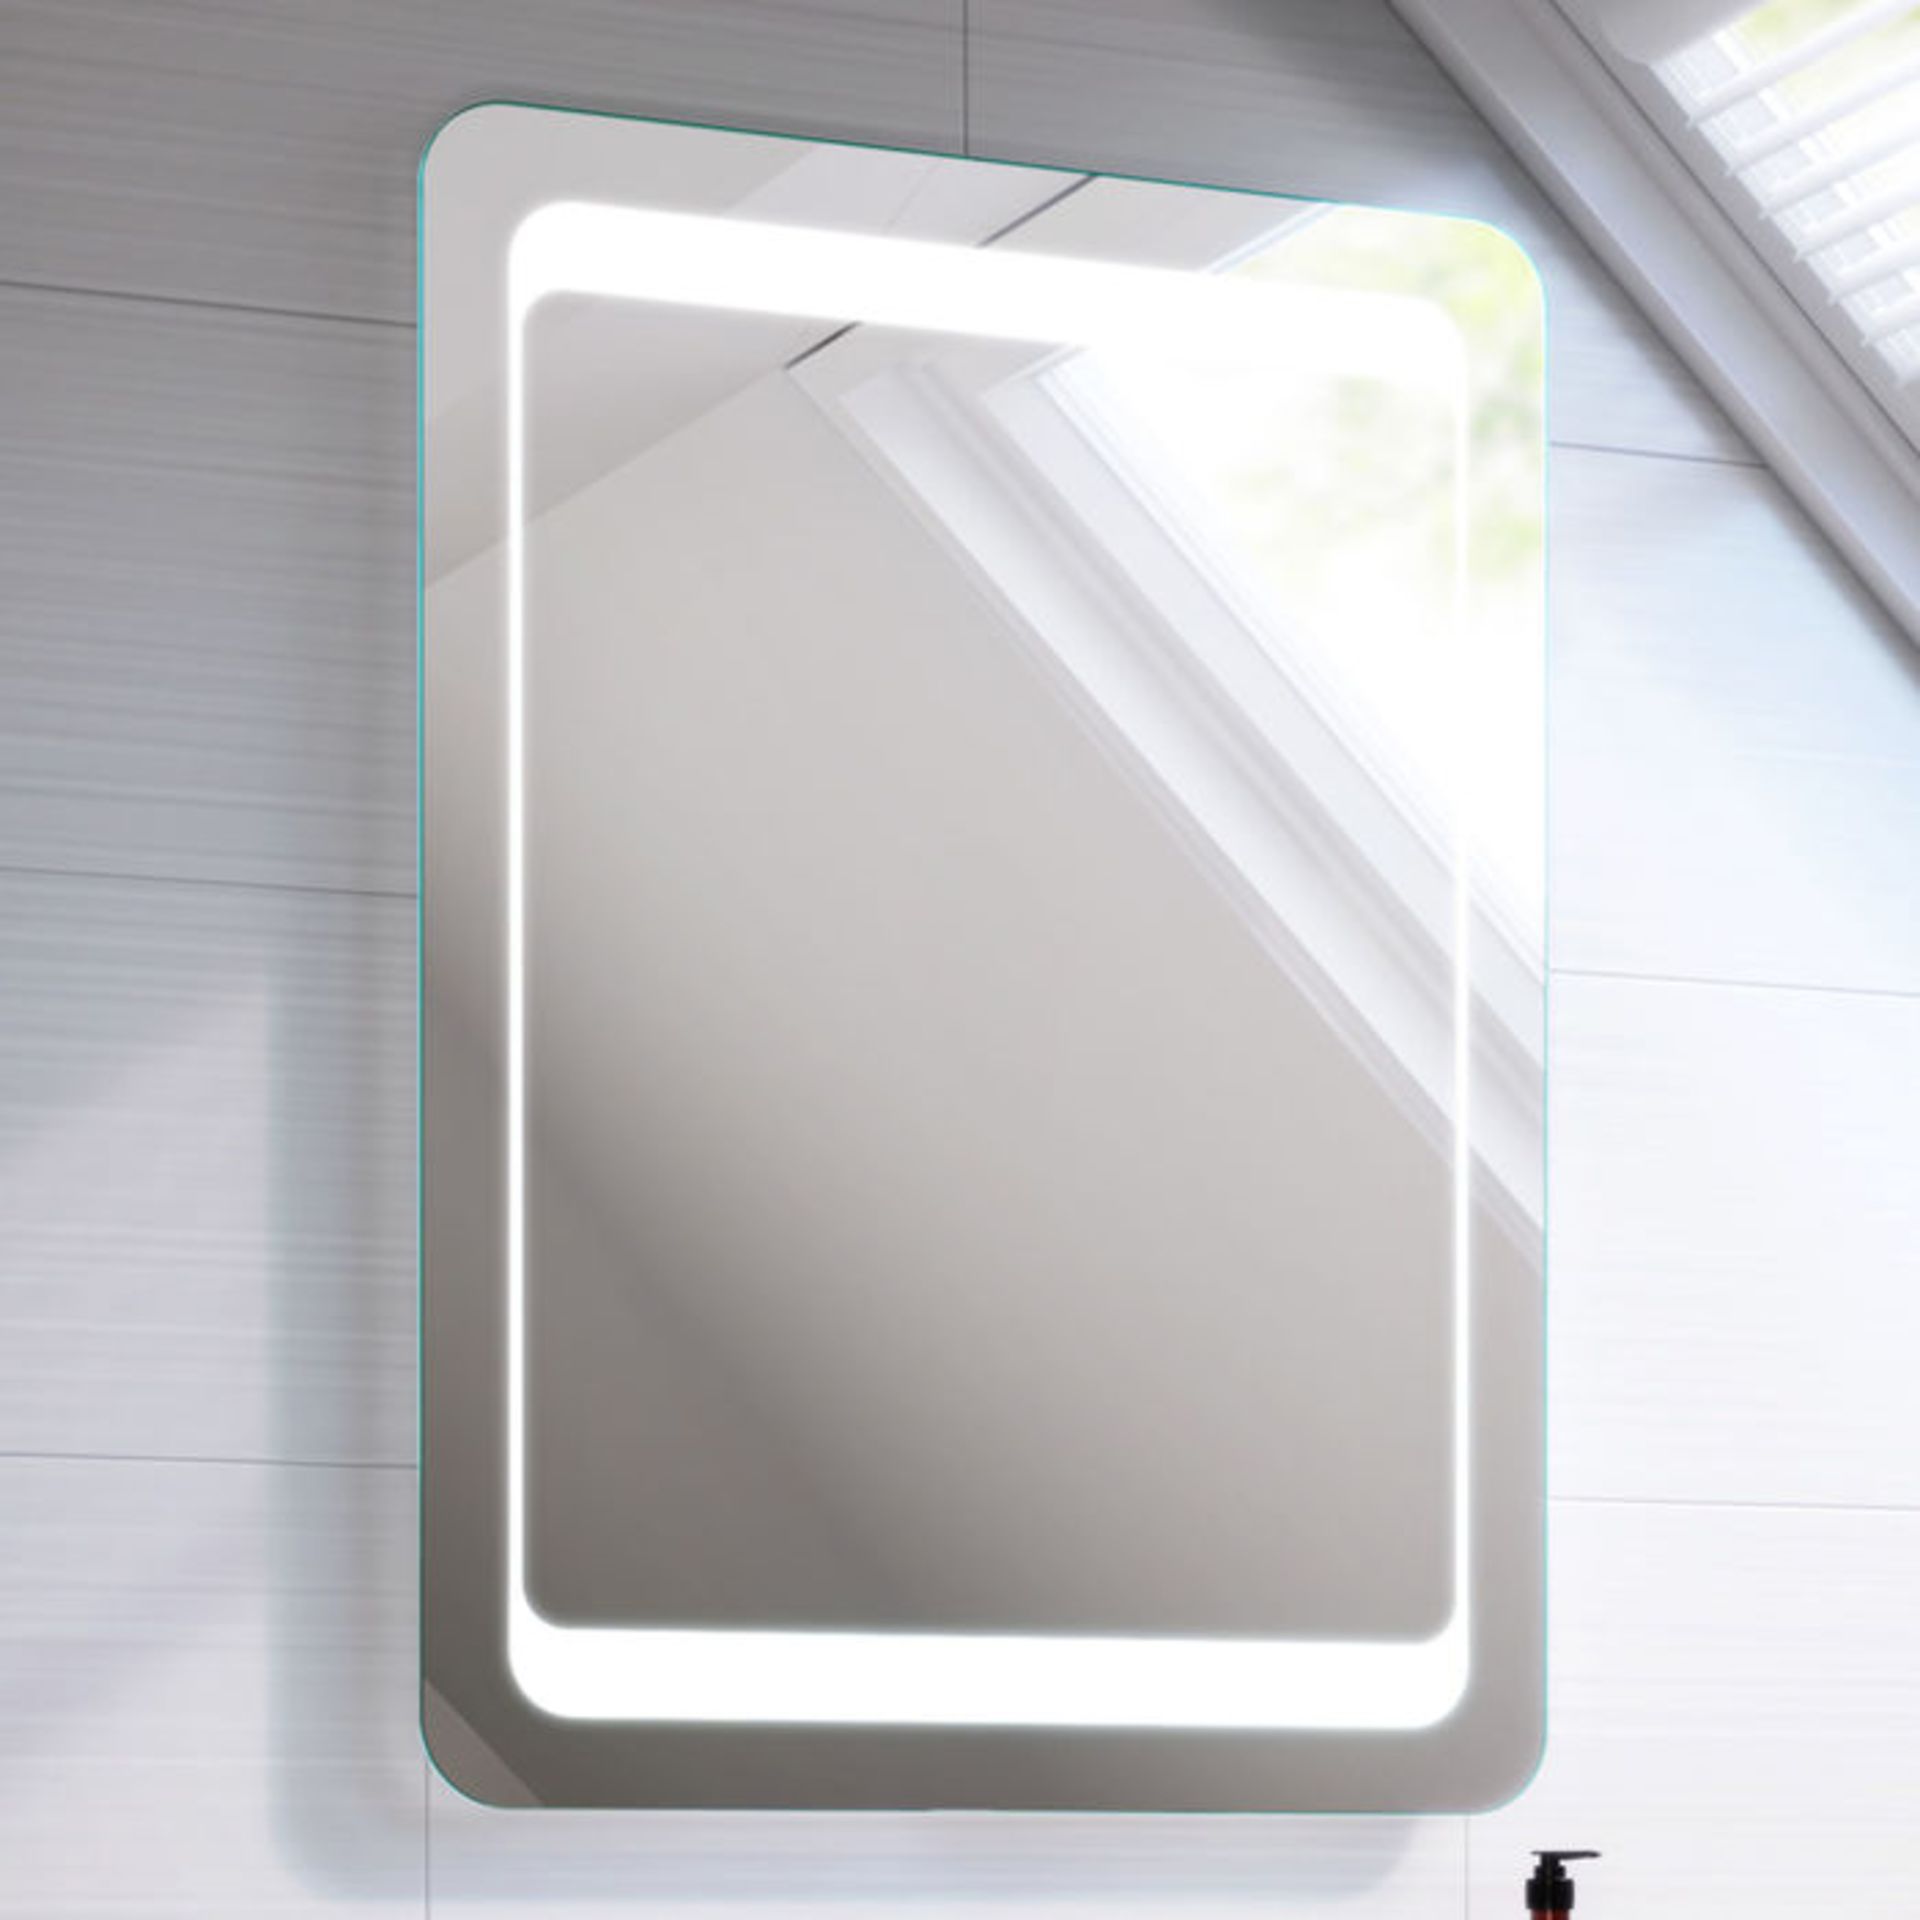 (H212) 900x650mm Quasar Illuminated LED Mirror. RRP £399.99. Energy efficient LED lighting with IP44 - Image 5 of 7